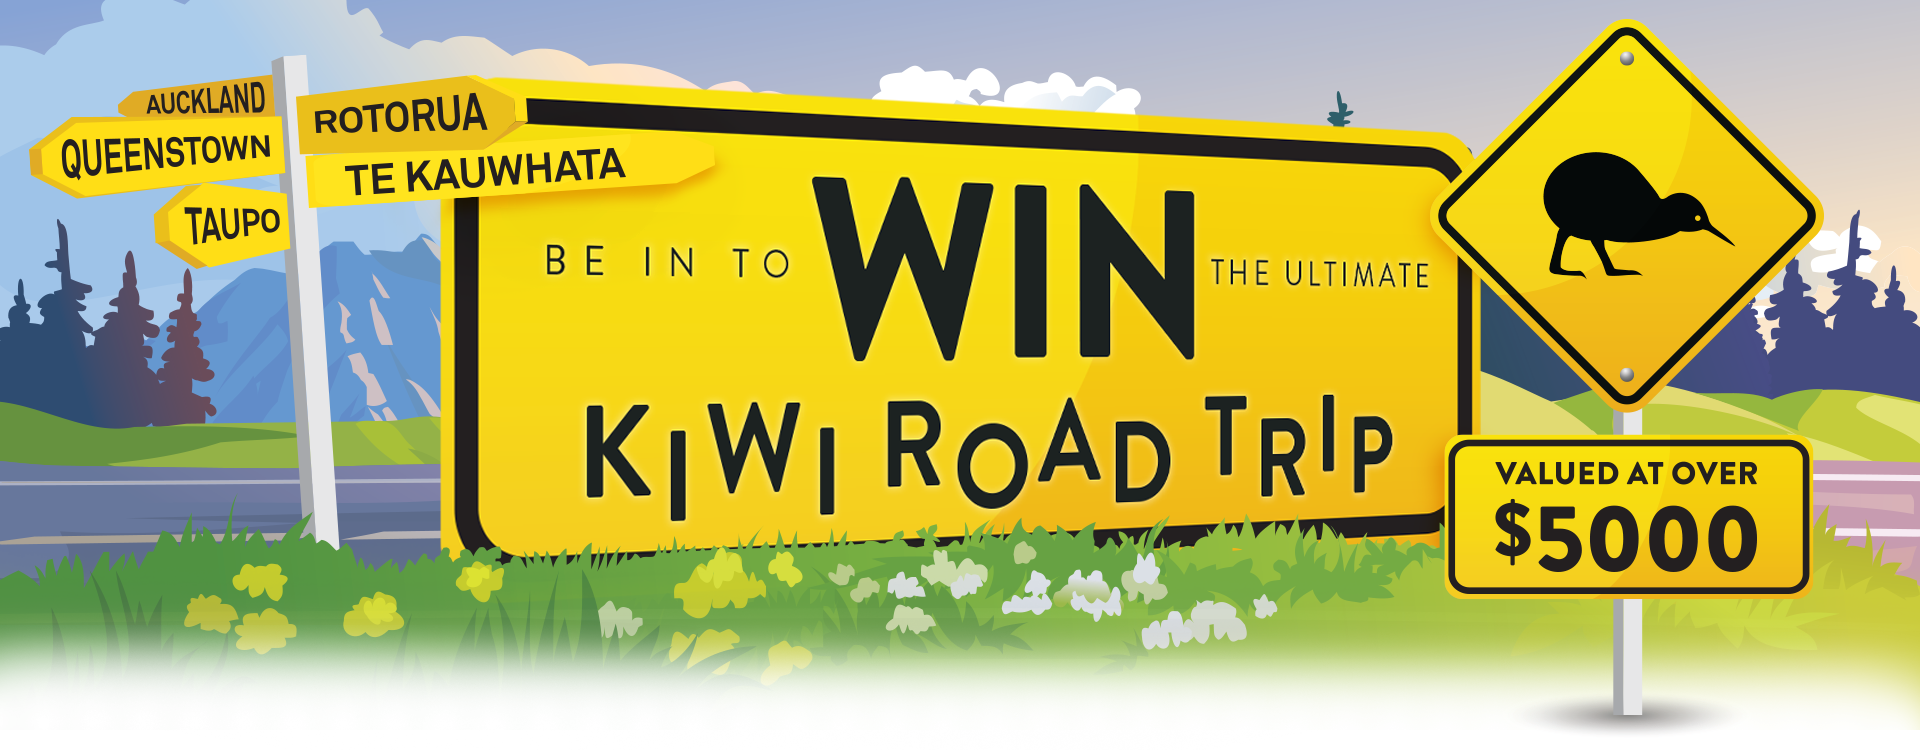 Be in to win the ultimate kiwi roadtrip competition banner